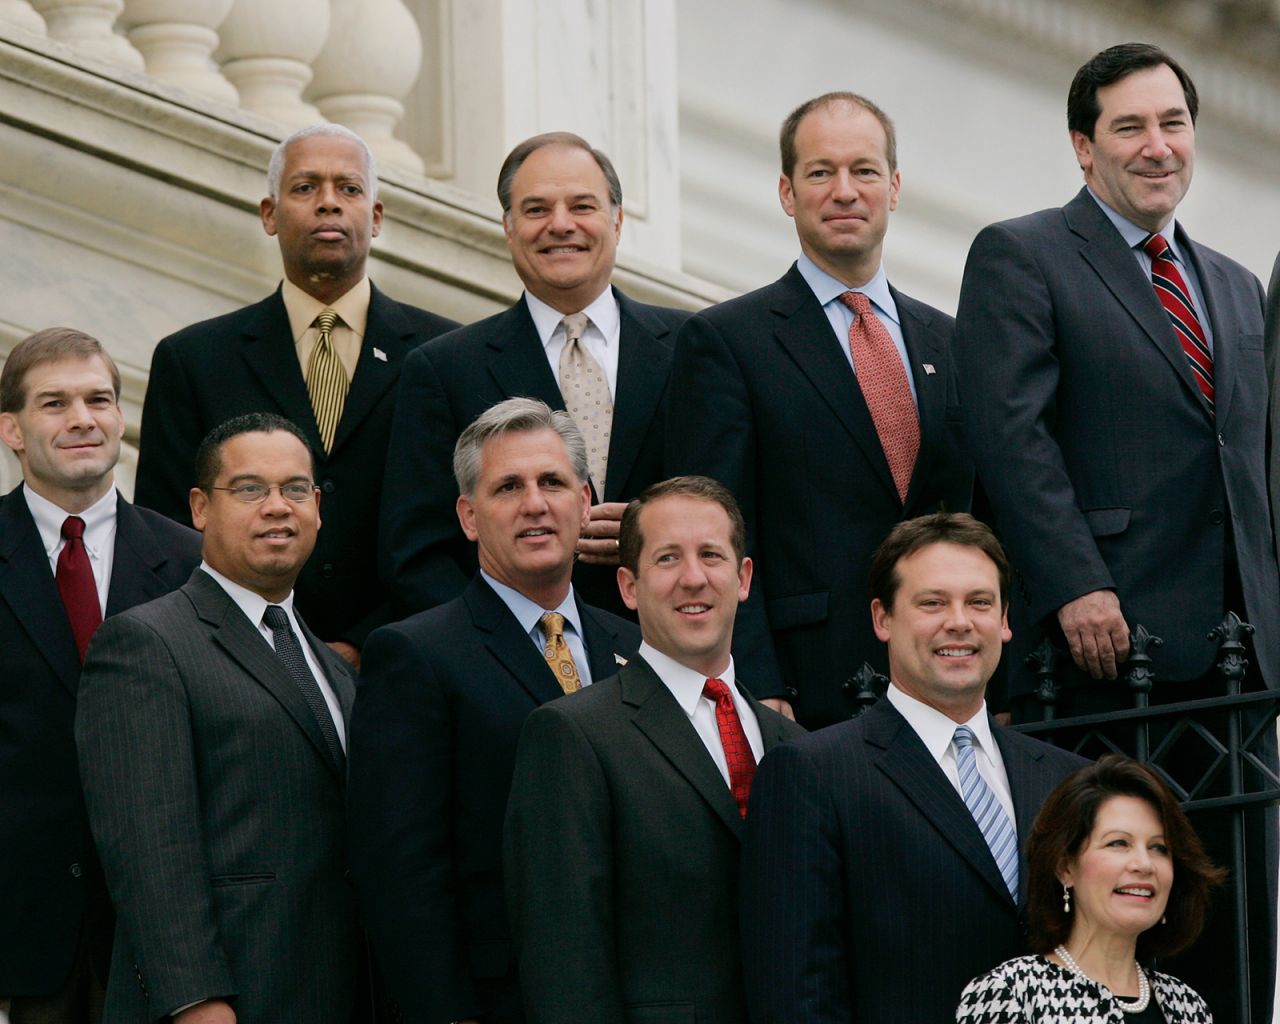 McCarthy — bottom row, third from left —poses with other newly elected US House members in 2006. McCarthy succeeded his former boss, Bill Thomas, who had retired.